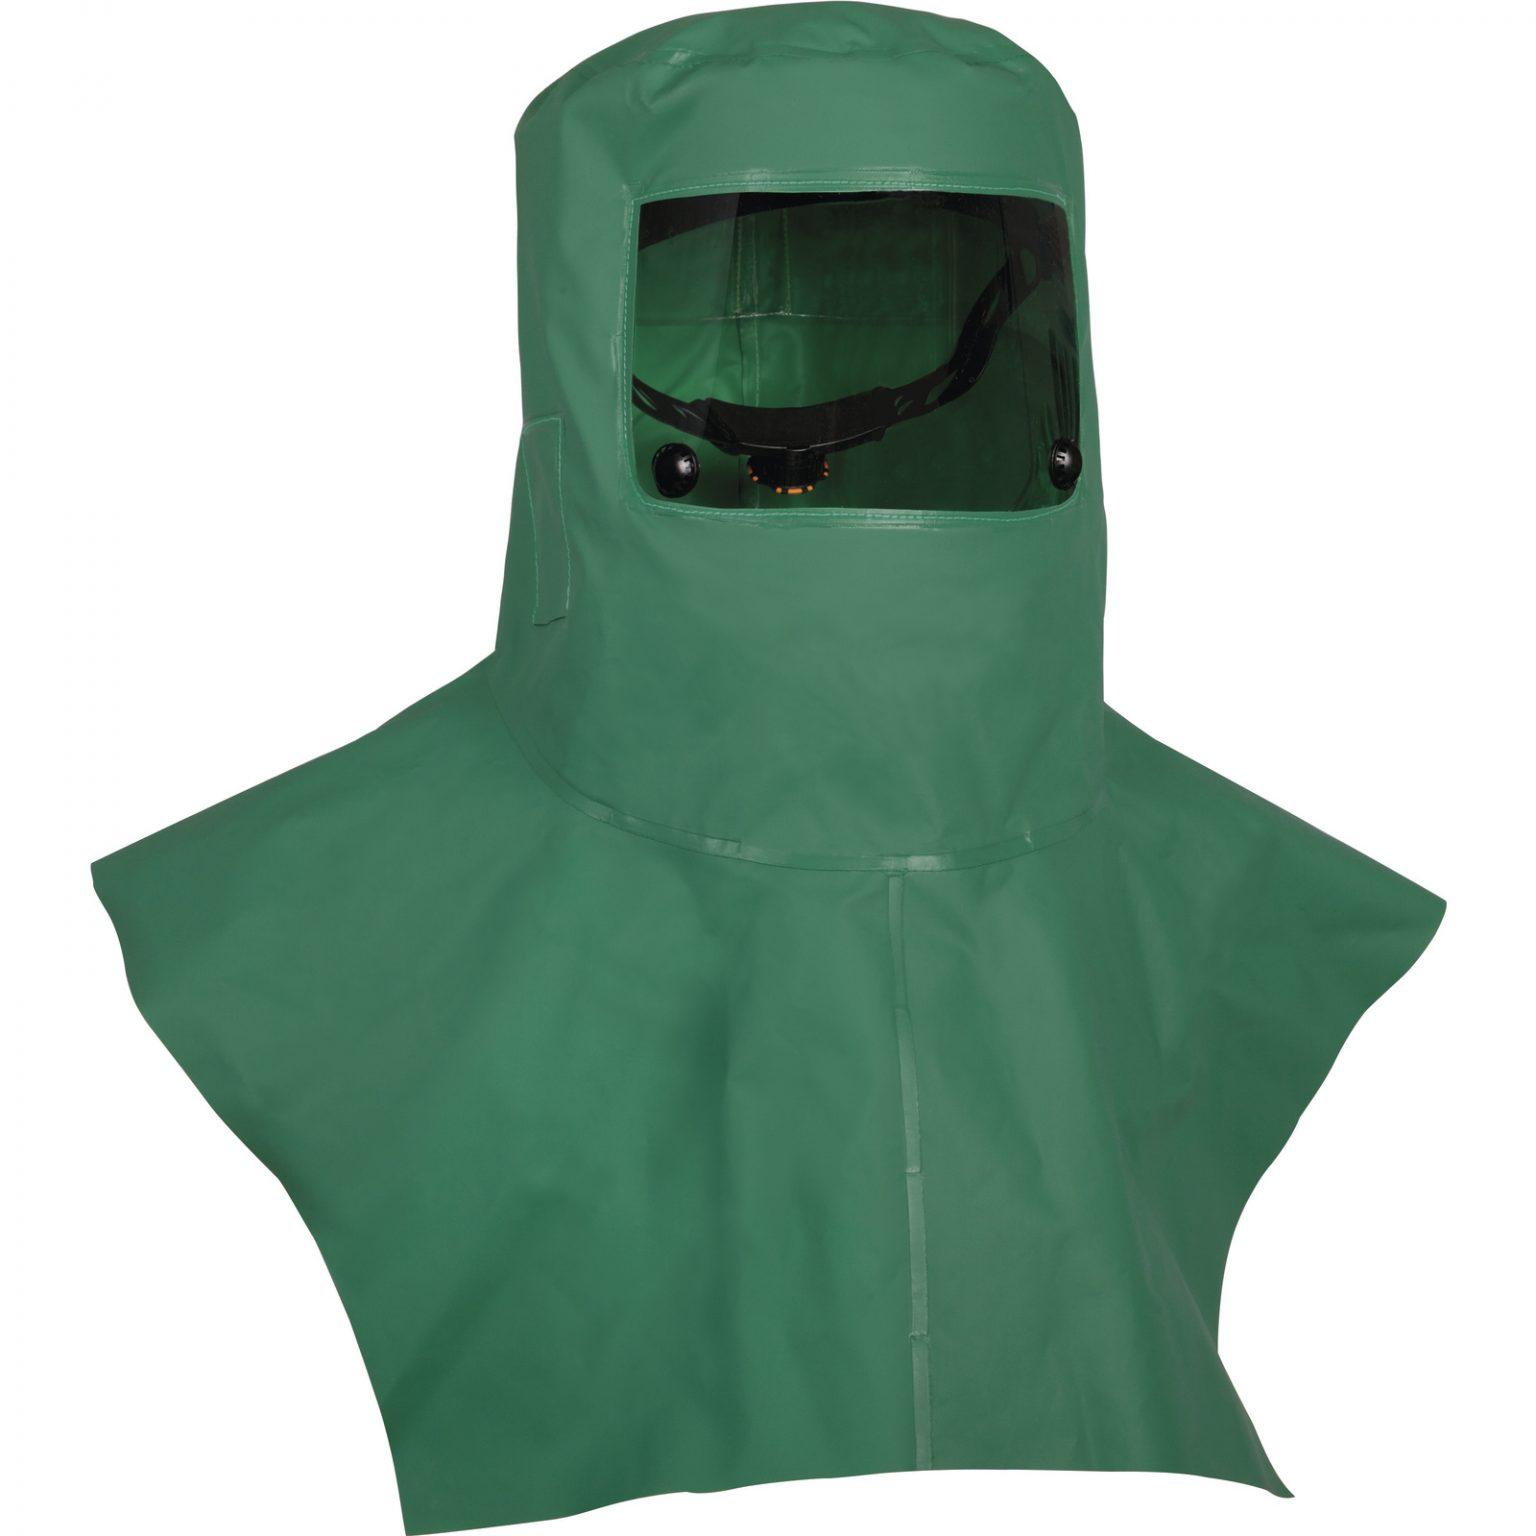 Safetyware - DELTA PLUS Anti-Acid / Chemical PVC Overall